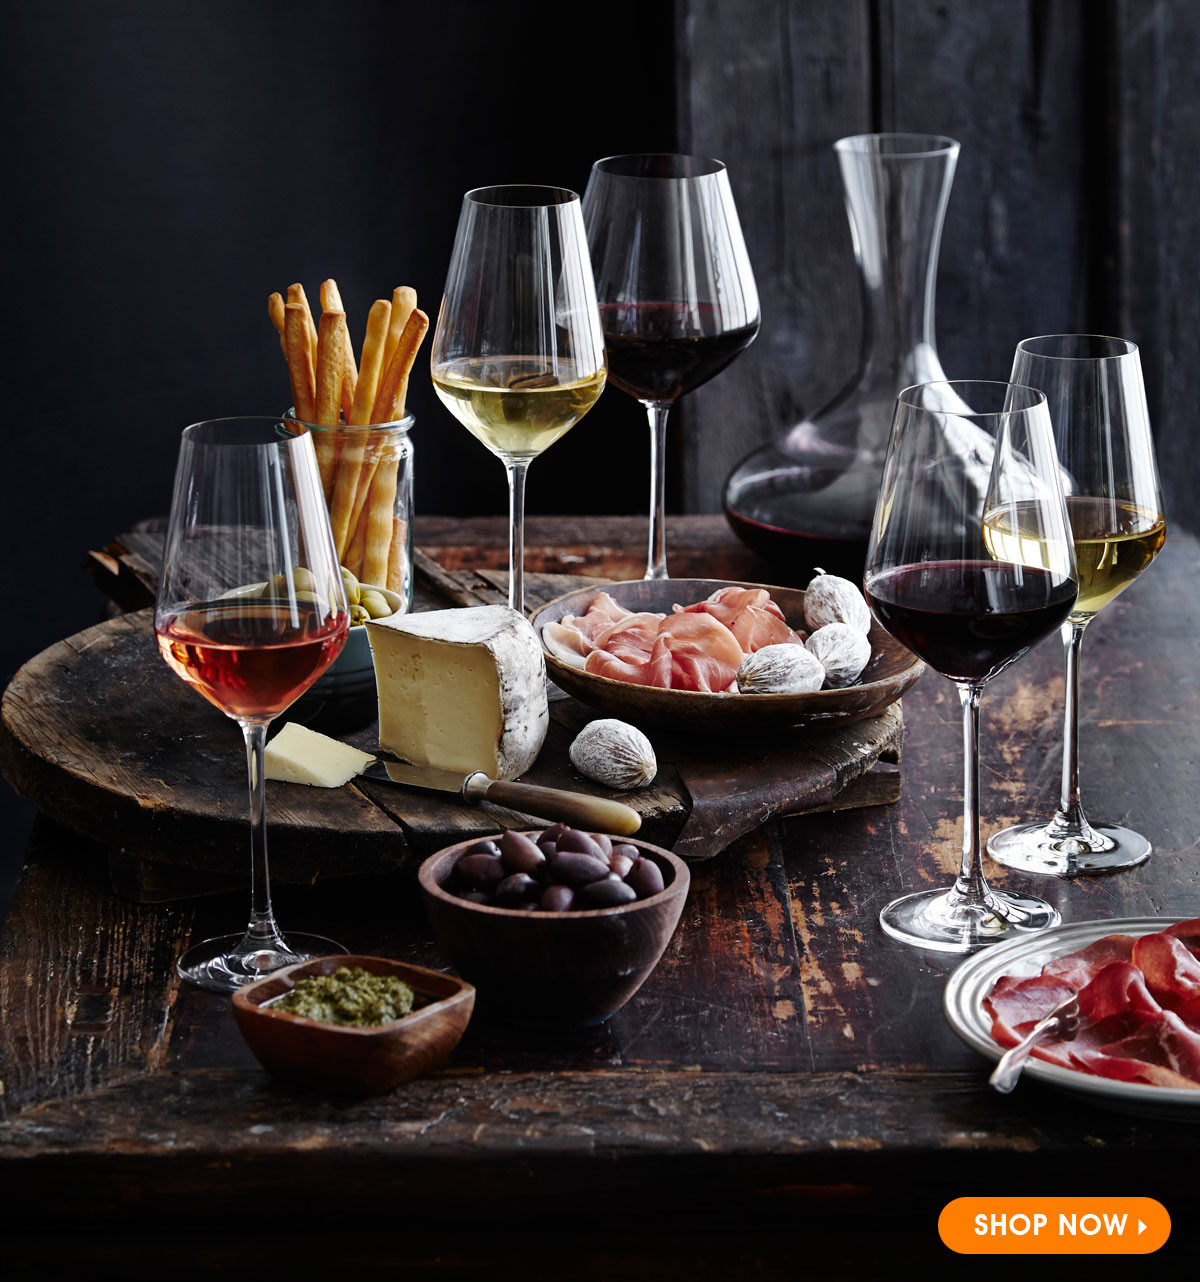 Wine Party Food Ideas
 Ideas for entertaining cheese and wine party tips